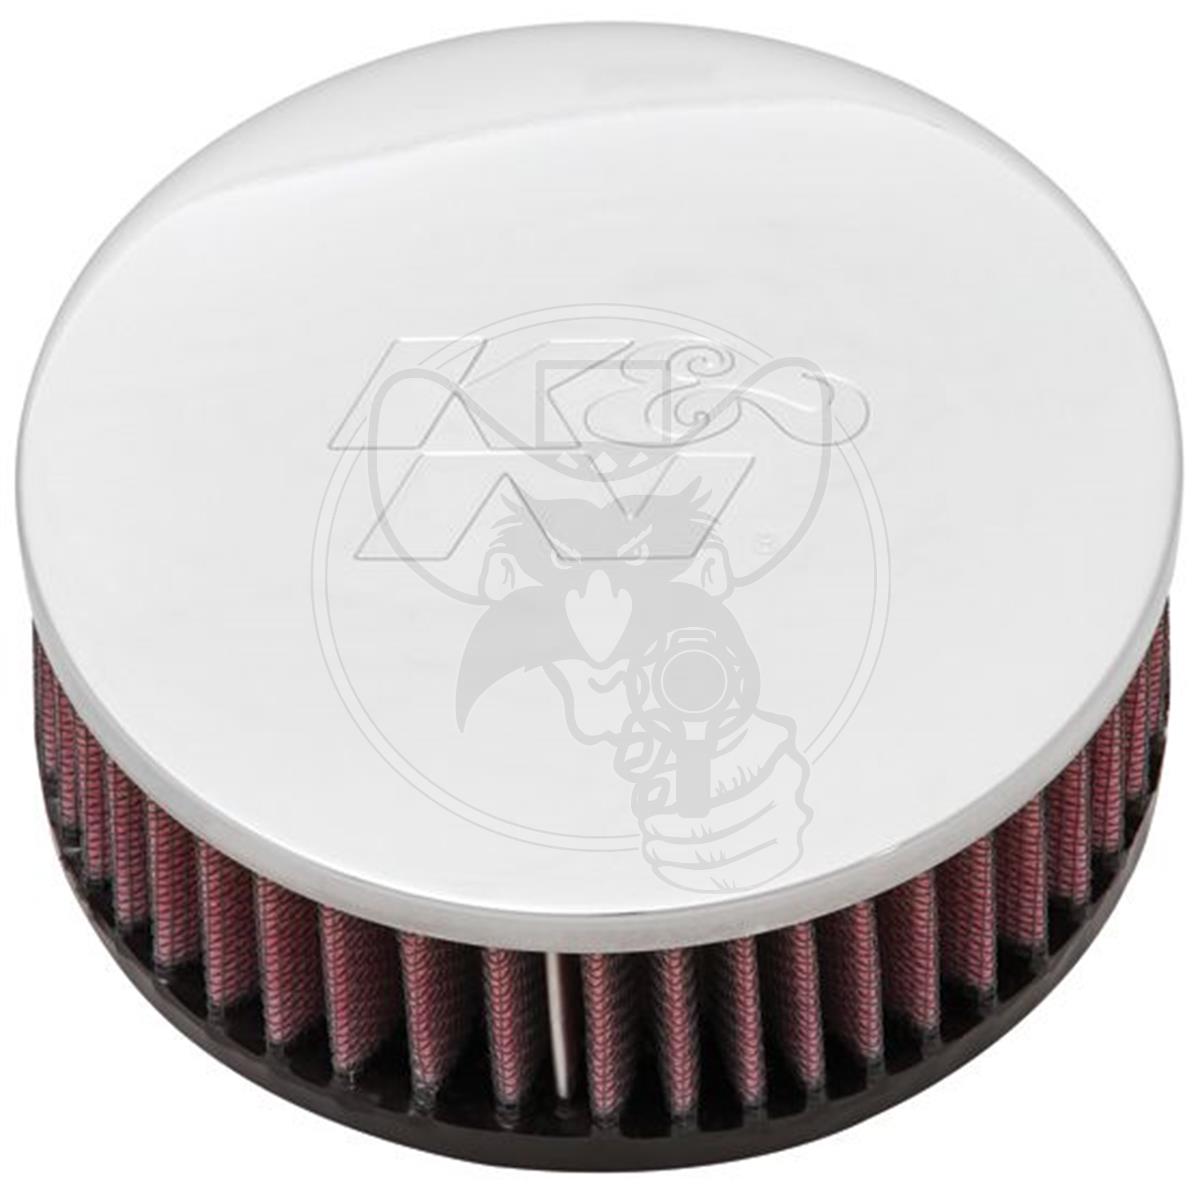 RE-0920 K&N Universal Clamp-On Air Filter